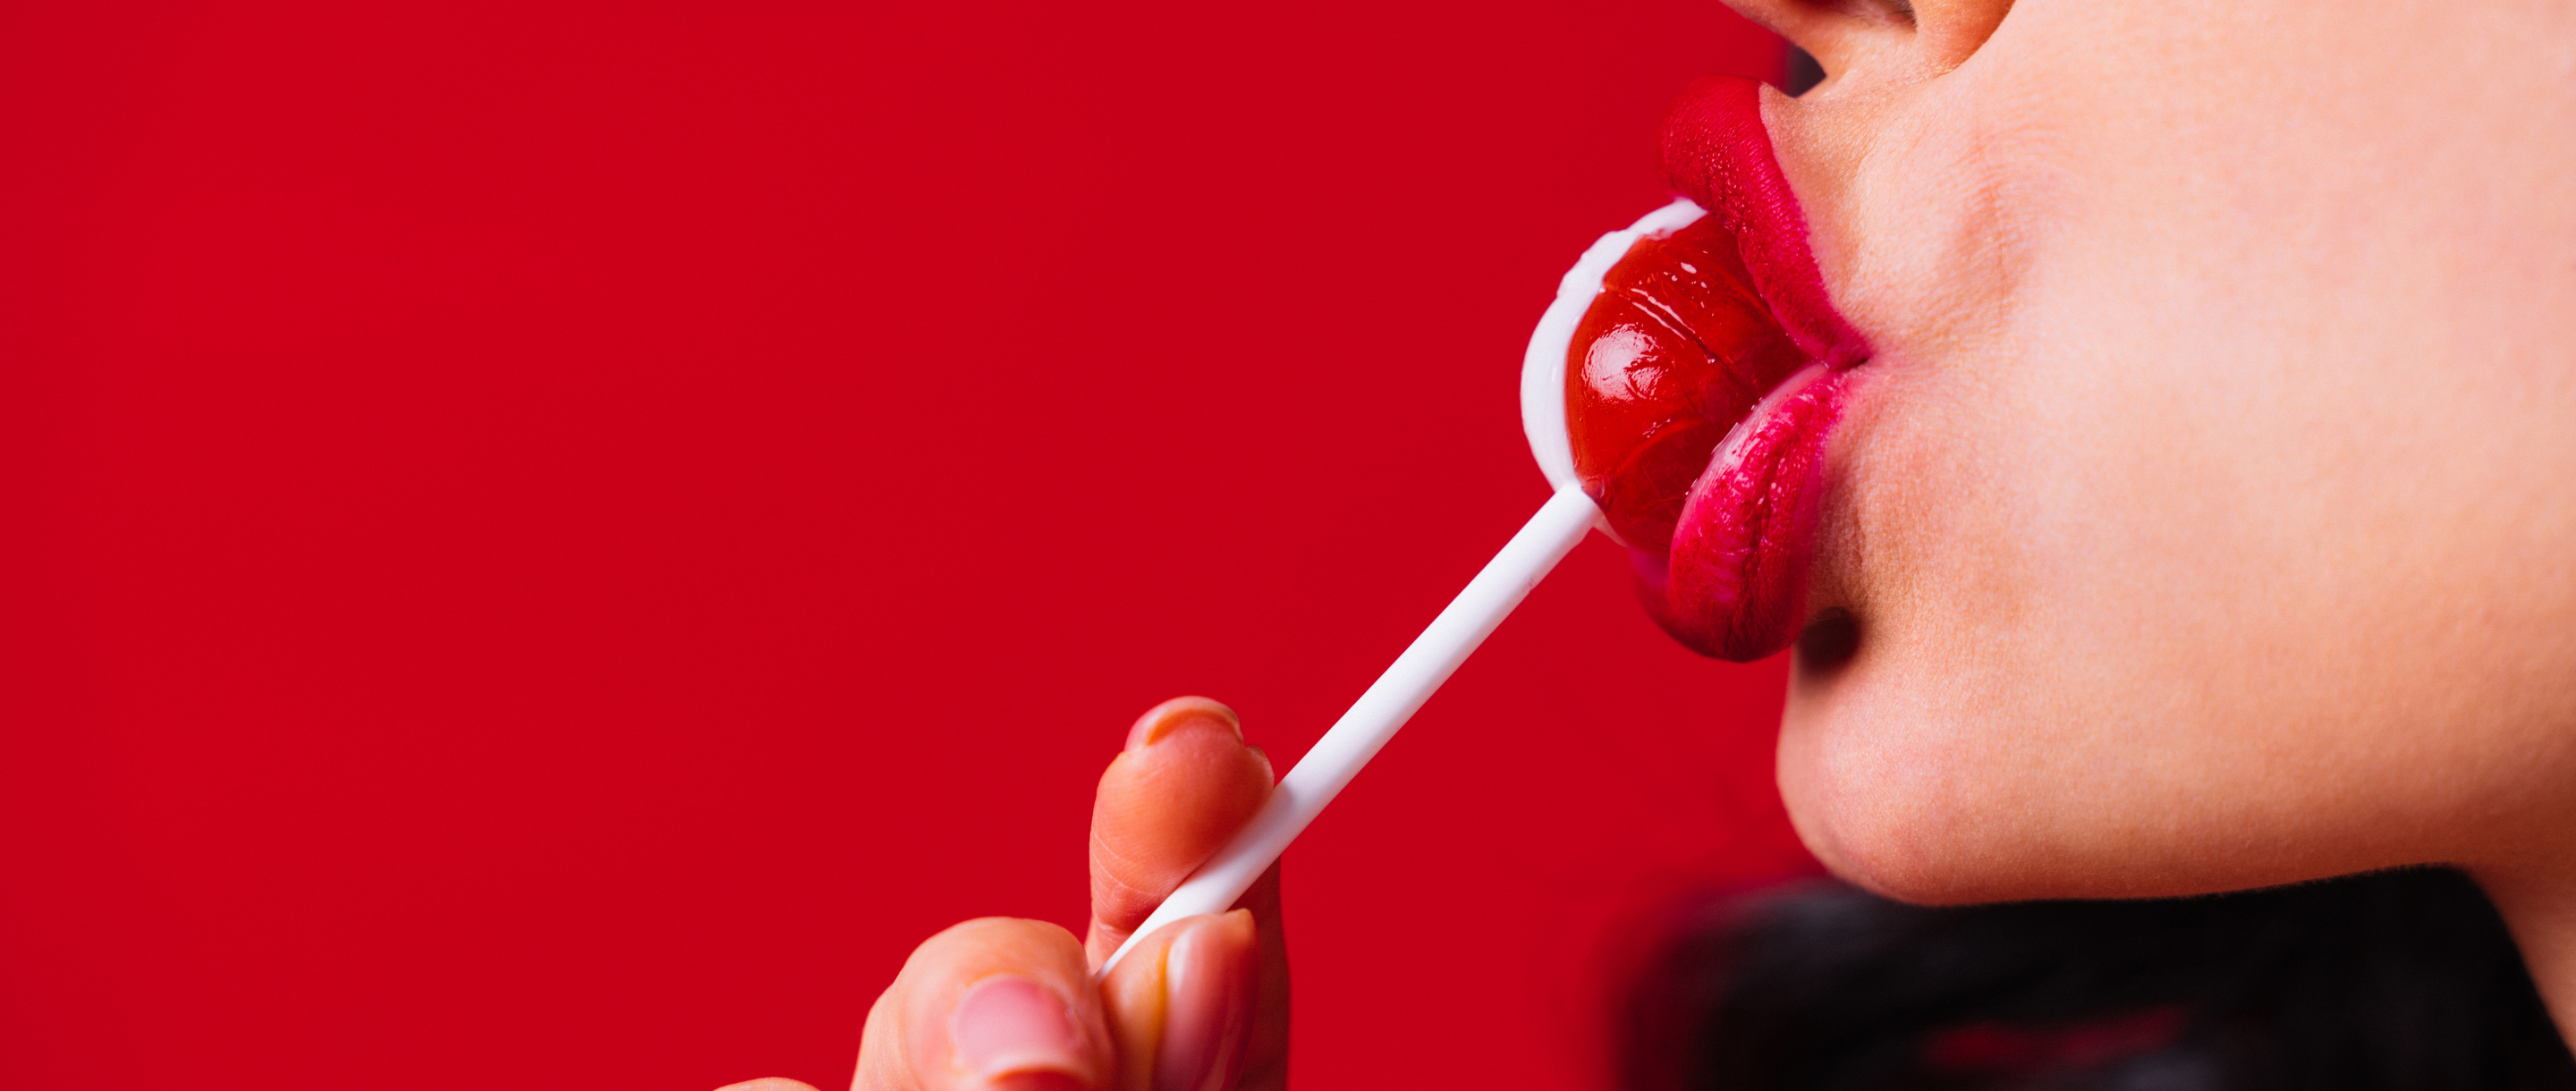 woman sucking a lollypop